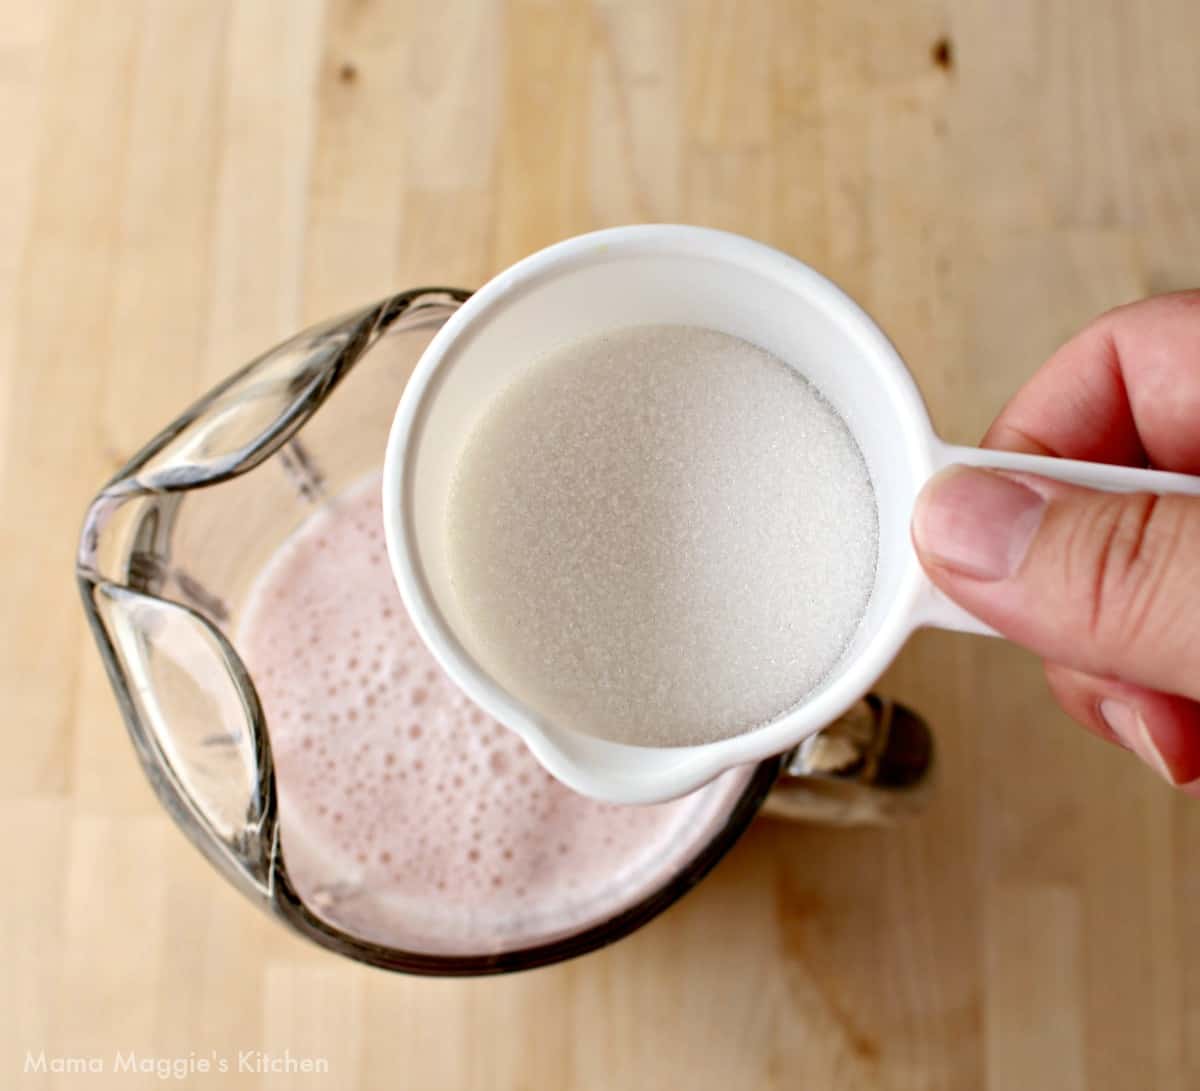 A hand holding a white measuring cup filled with sugar over a large pitcher.